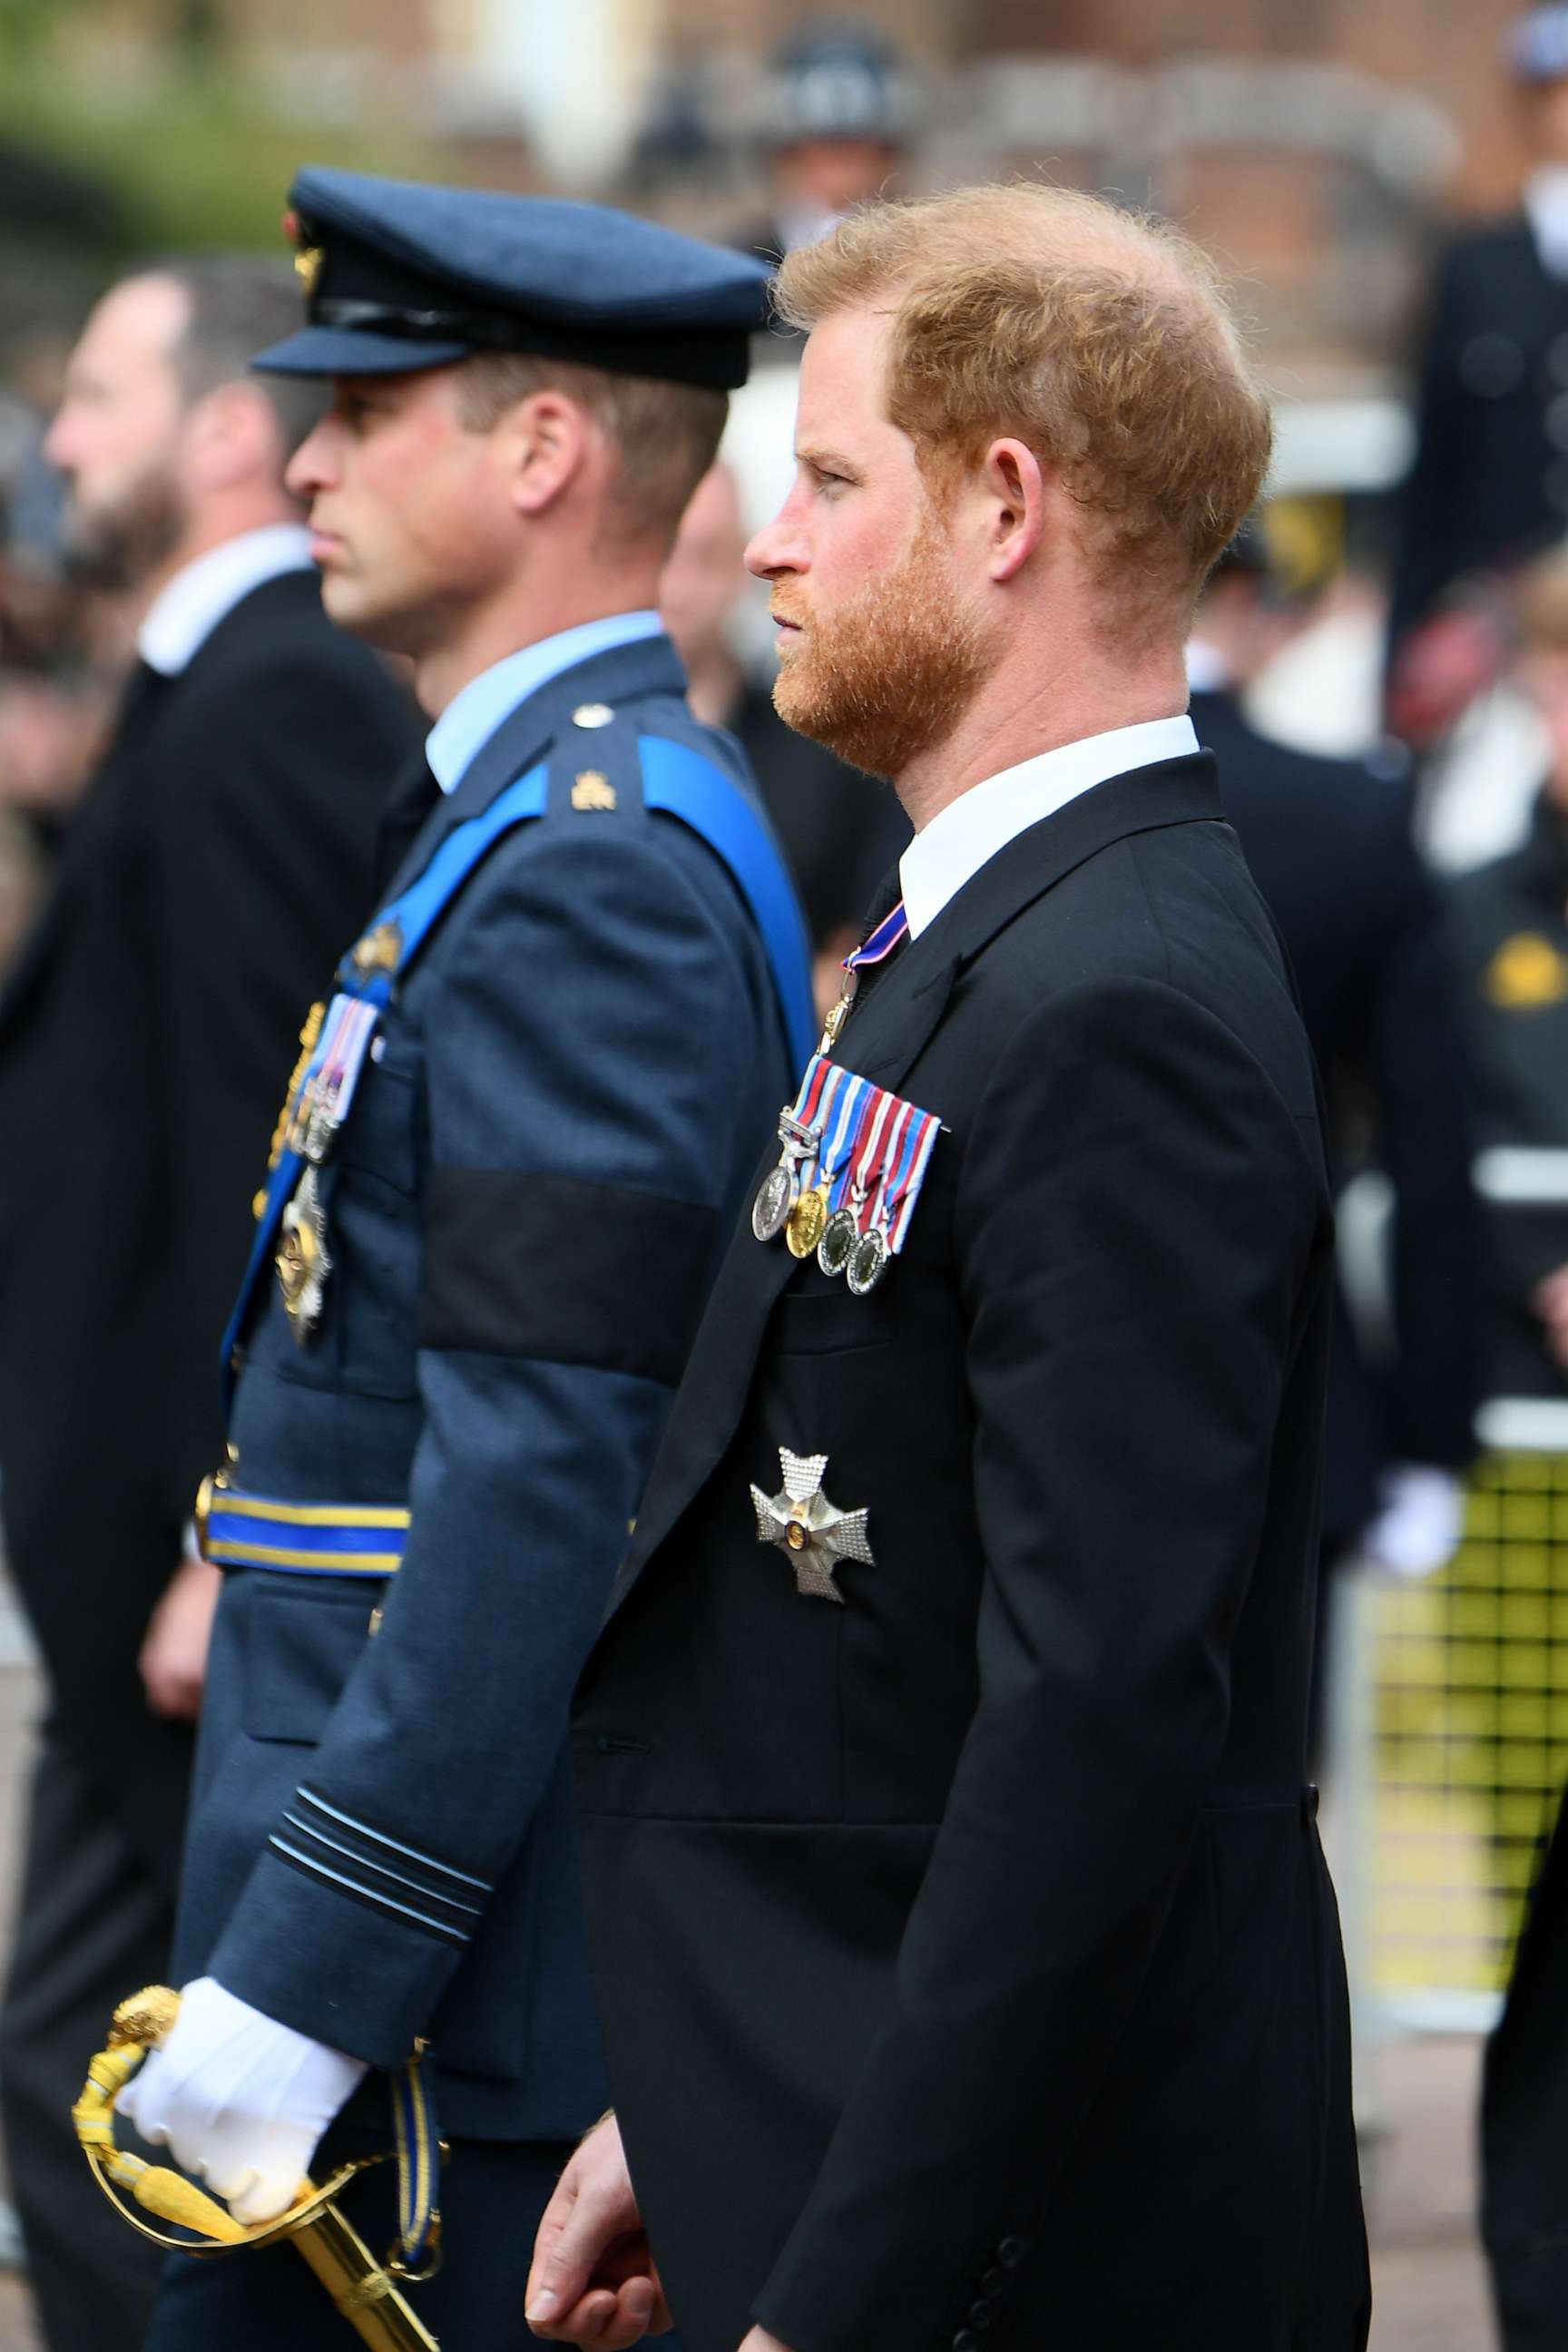 PHOTO: Left, Prince William, Prince of Wales and Prince Harry, Duke of Sussex follow Queen Elizabeth II's funeral cortege borne on the State Gun Carriage of the Royal Navy as it leaves Westminster Abbey on Sept. 19, 2022 in London.